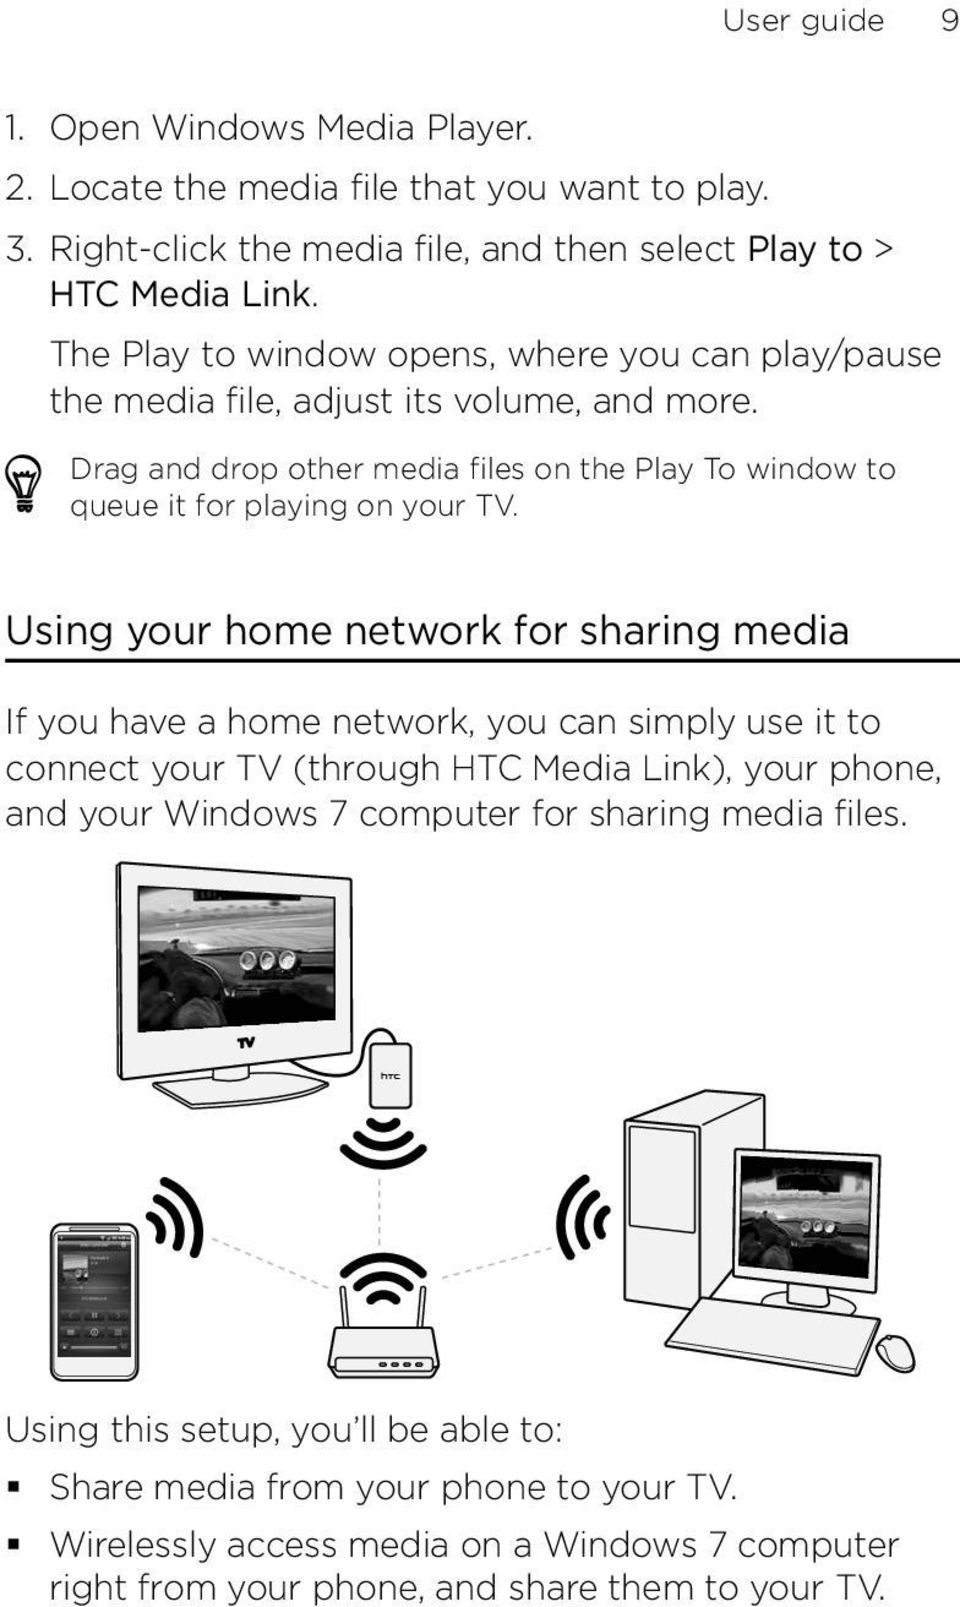 Drag and drop other media files on the Play To window to queue it for playing on your TV.